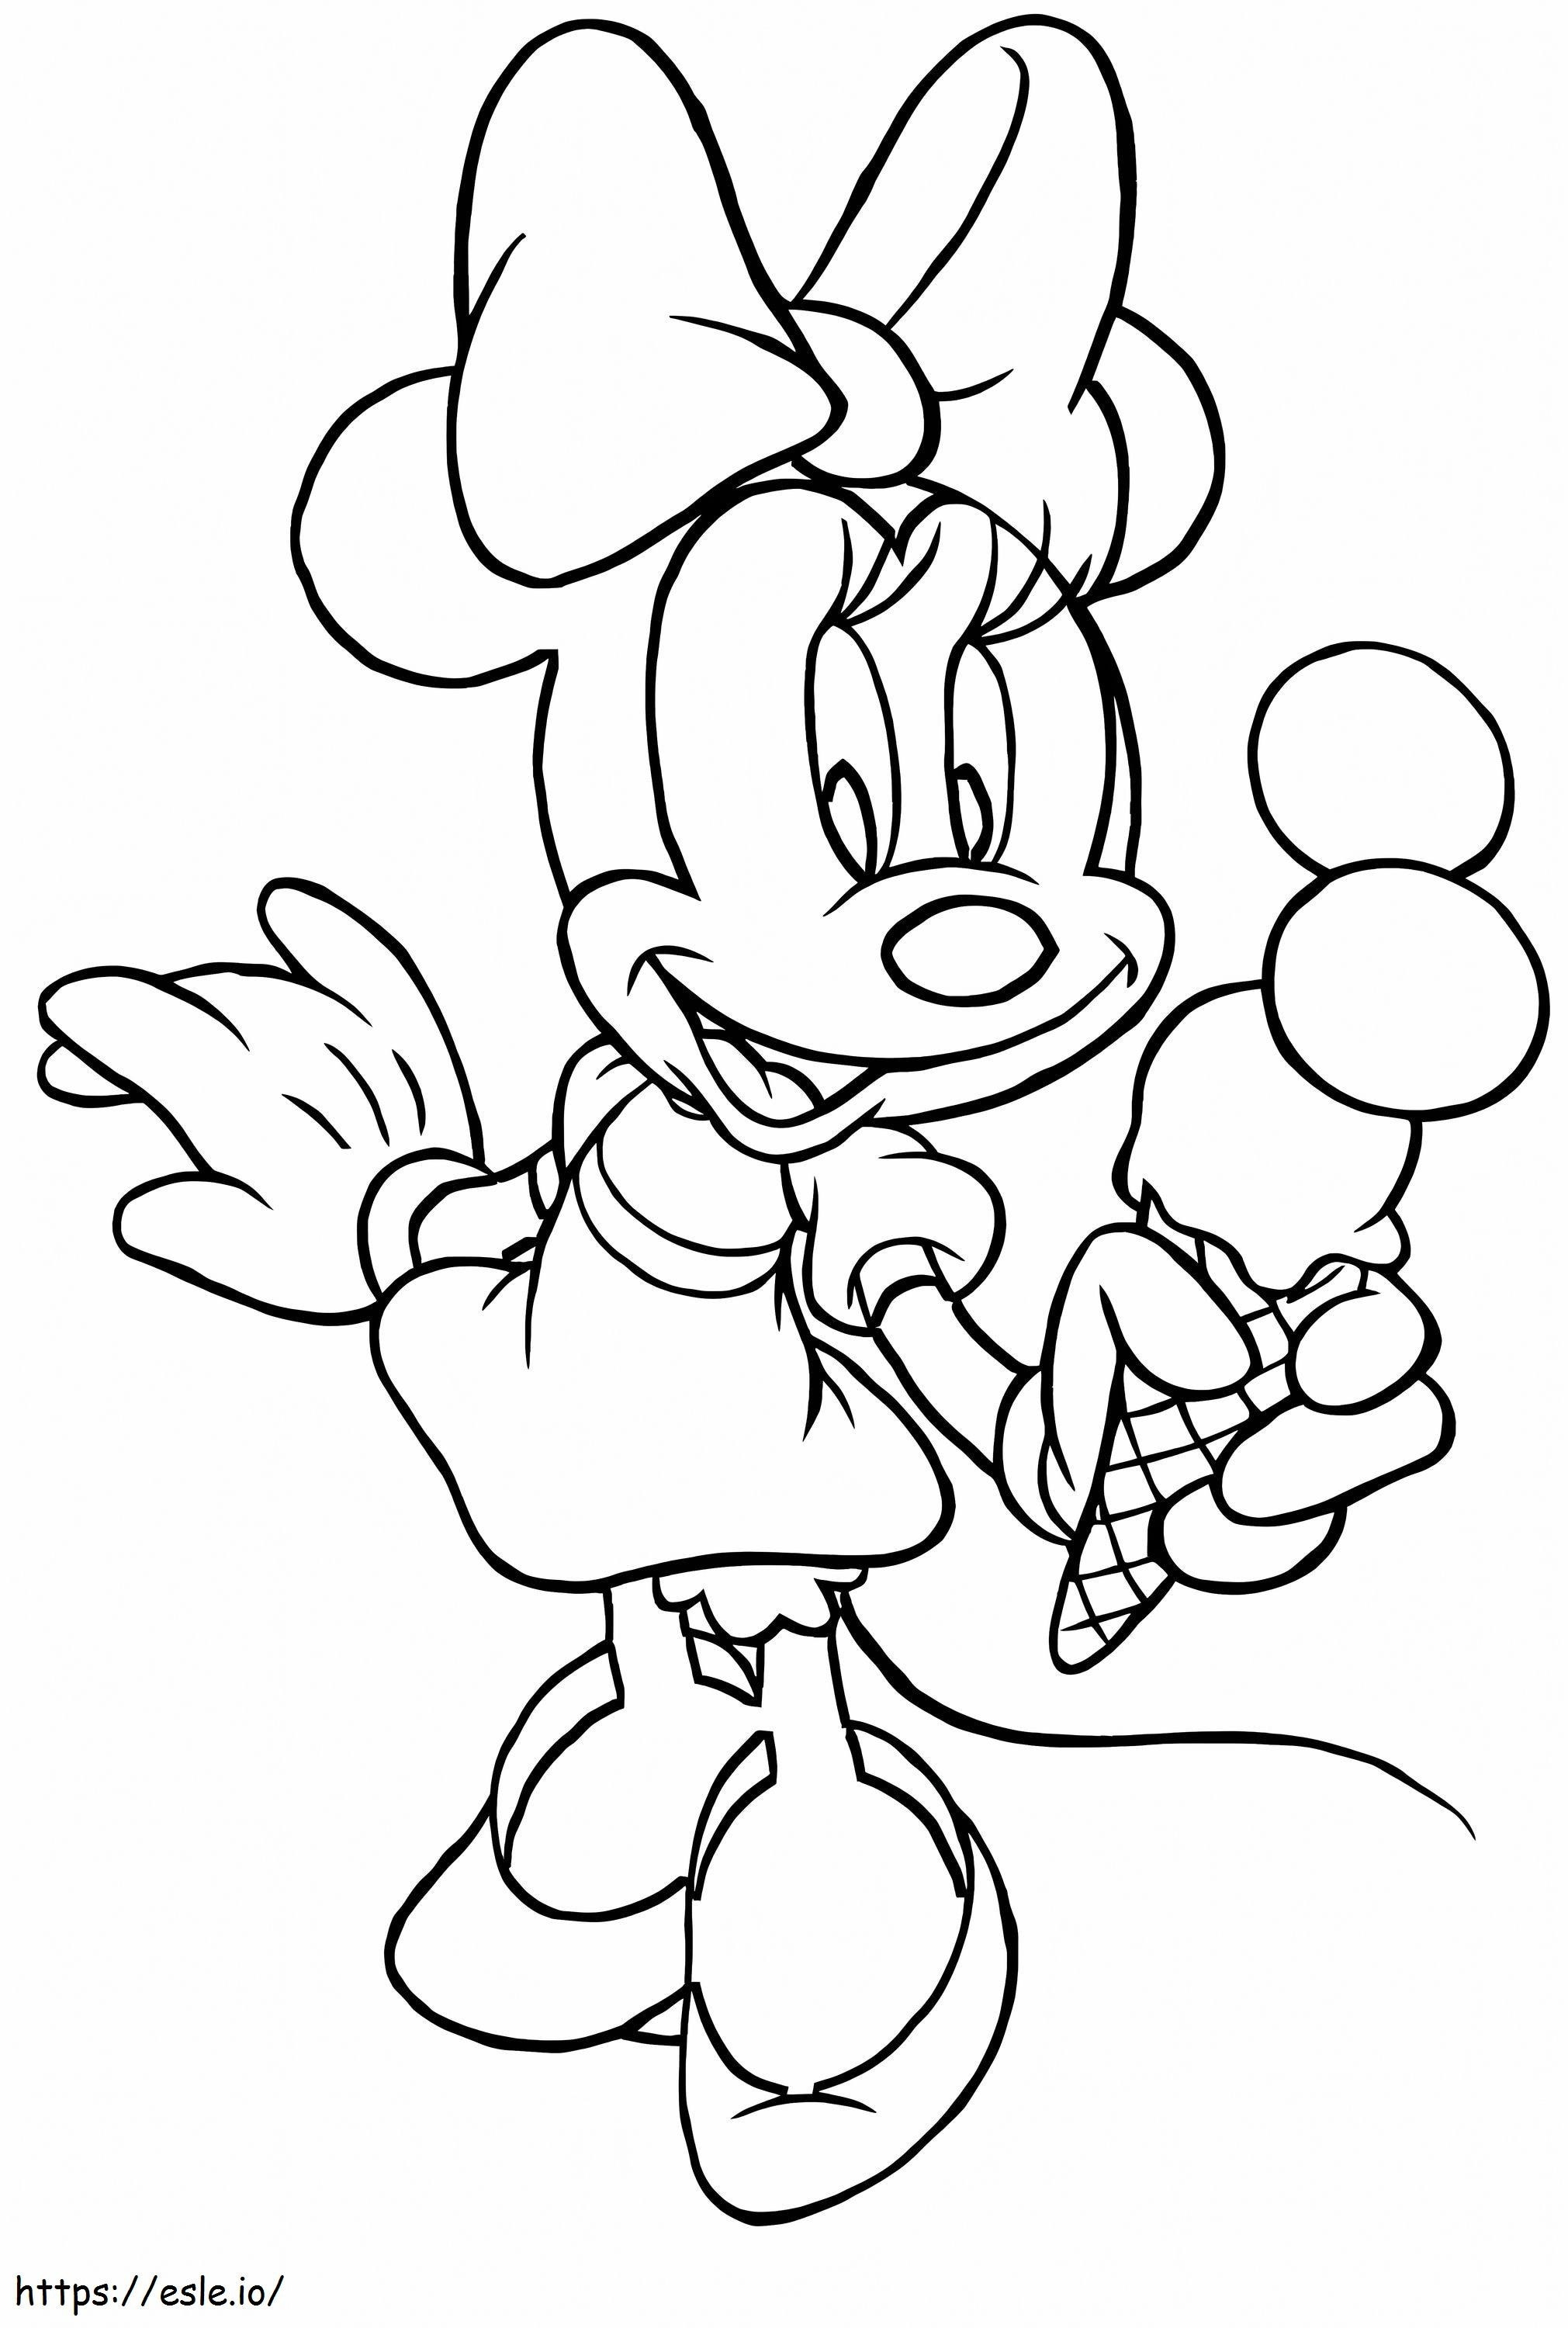 Minnie Mouse Holding Ice Cream coloring page